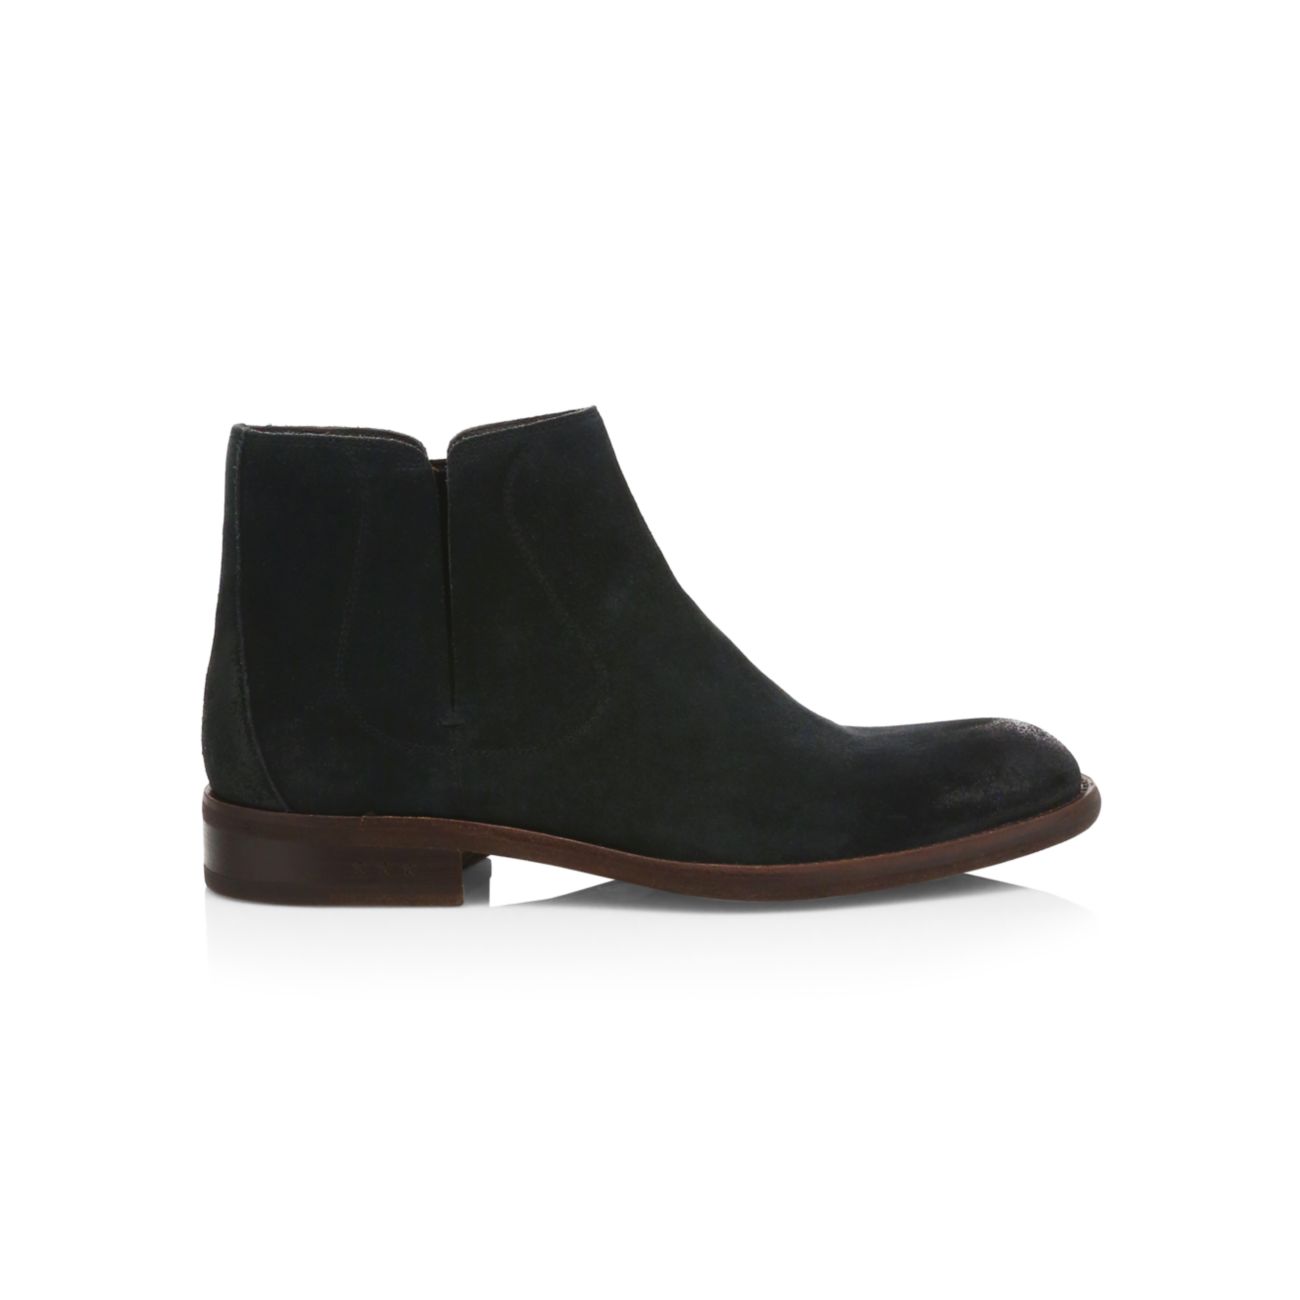 Star USA Waverly Suede Chelsea Boots John Varvatos